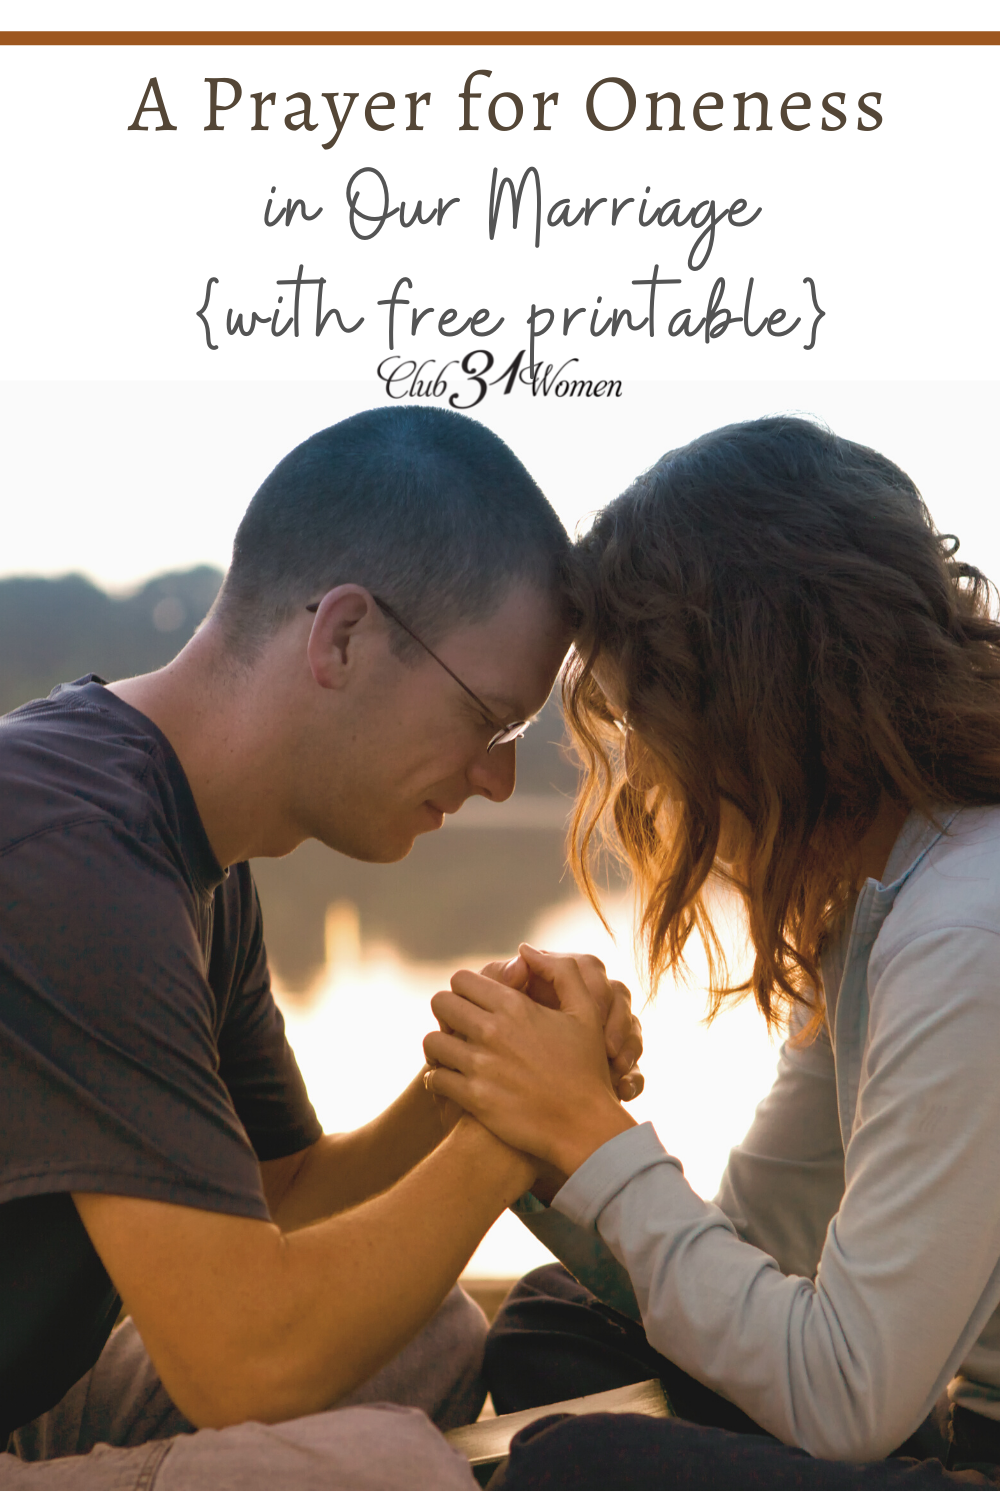 Do you pray for your marriage? Here's a beautiful prayer asking God for specific requests for love and unity in your relationship! via @Club31Women